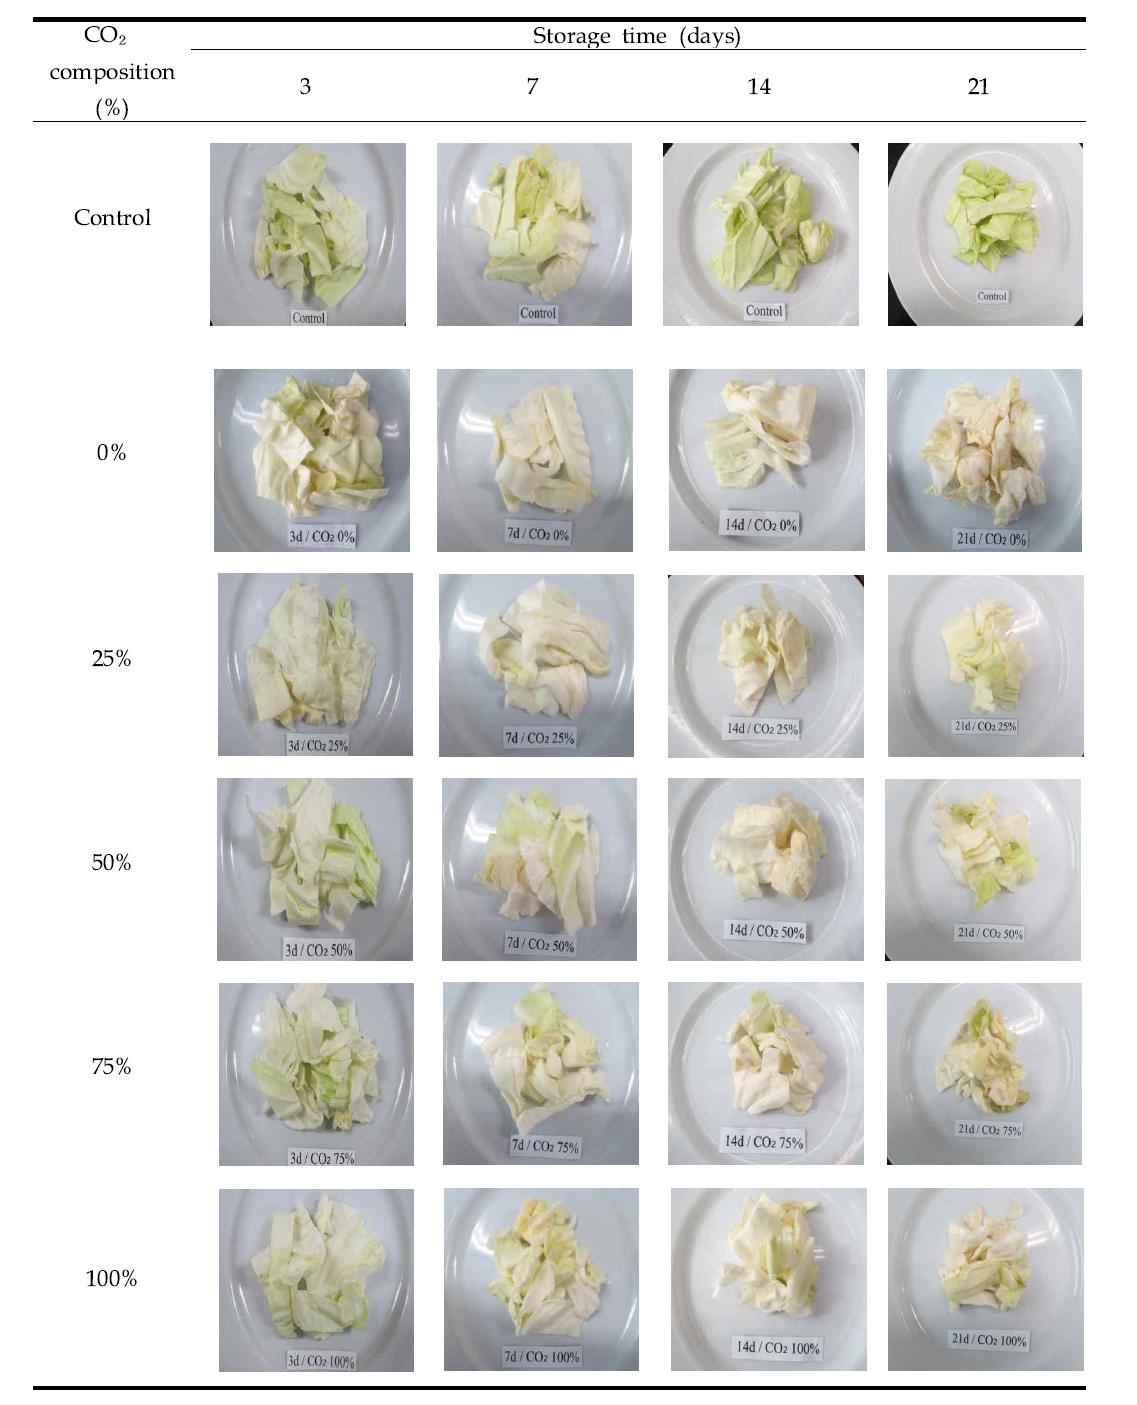 Digital photography of modified atmosphere packaging on cabbage for 21 days at 4±2oC.